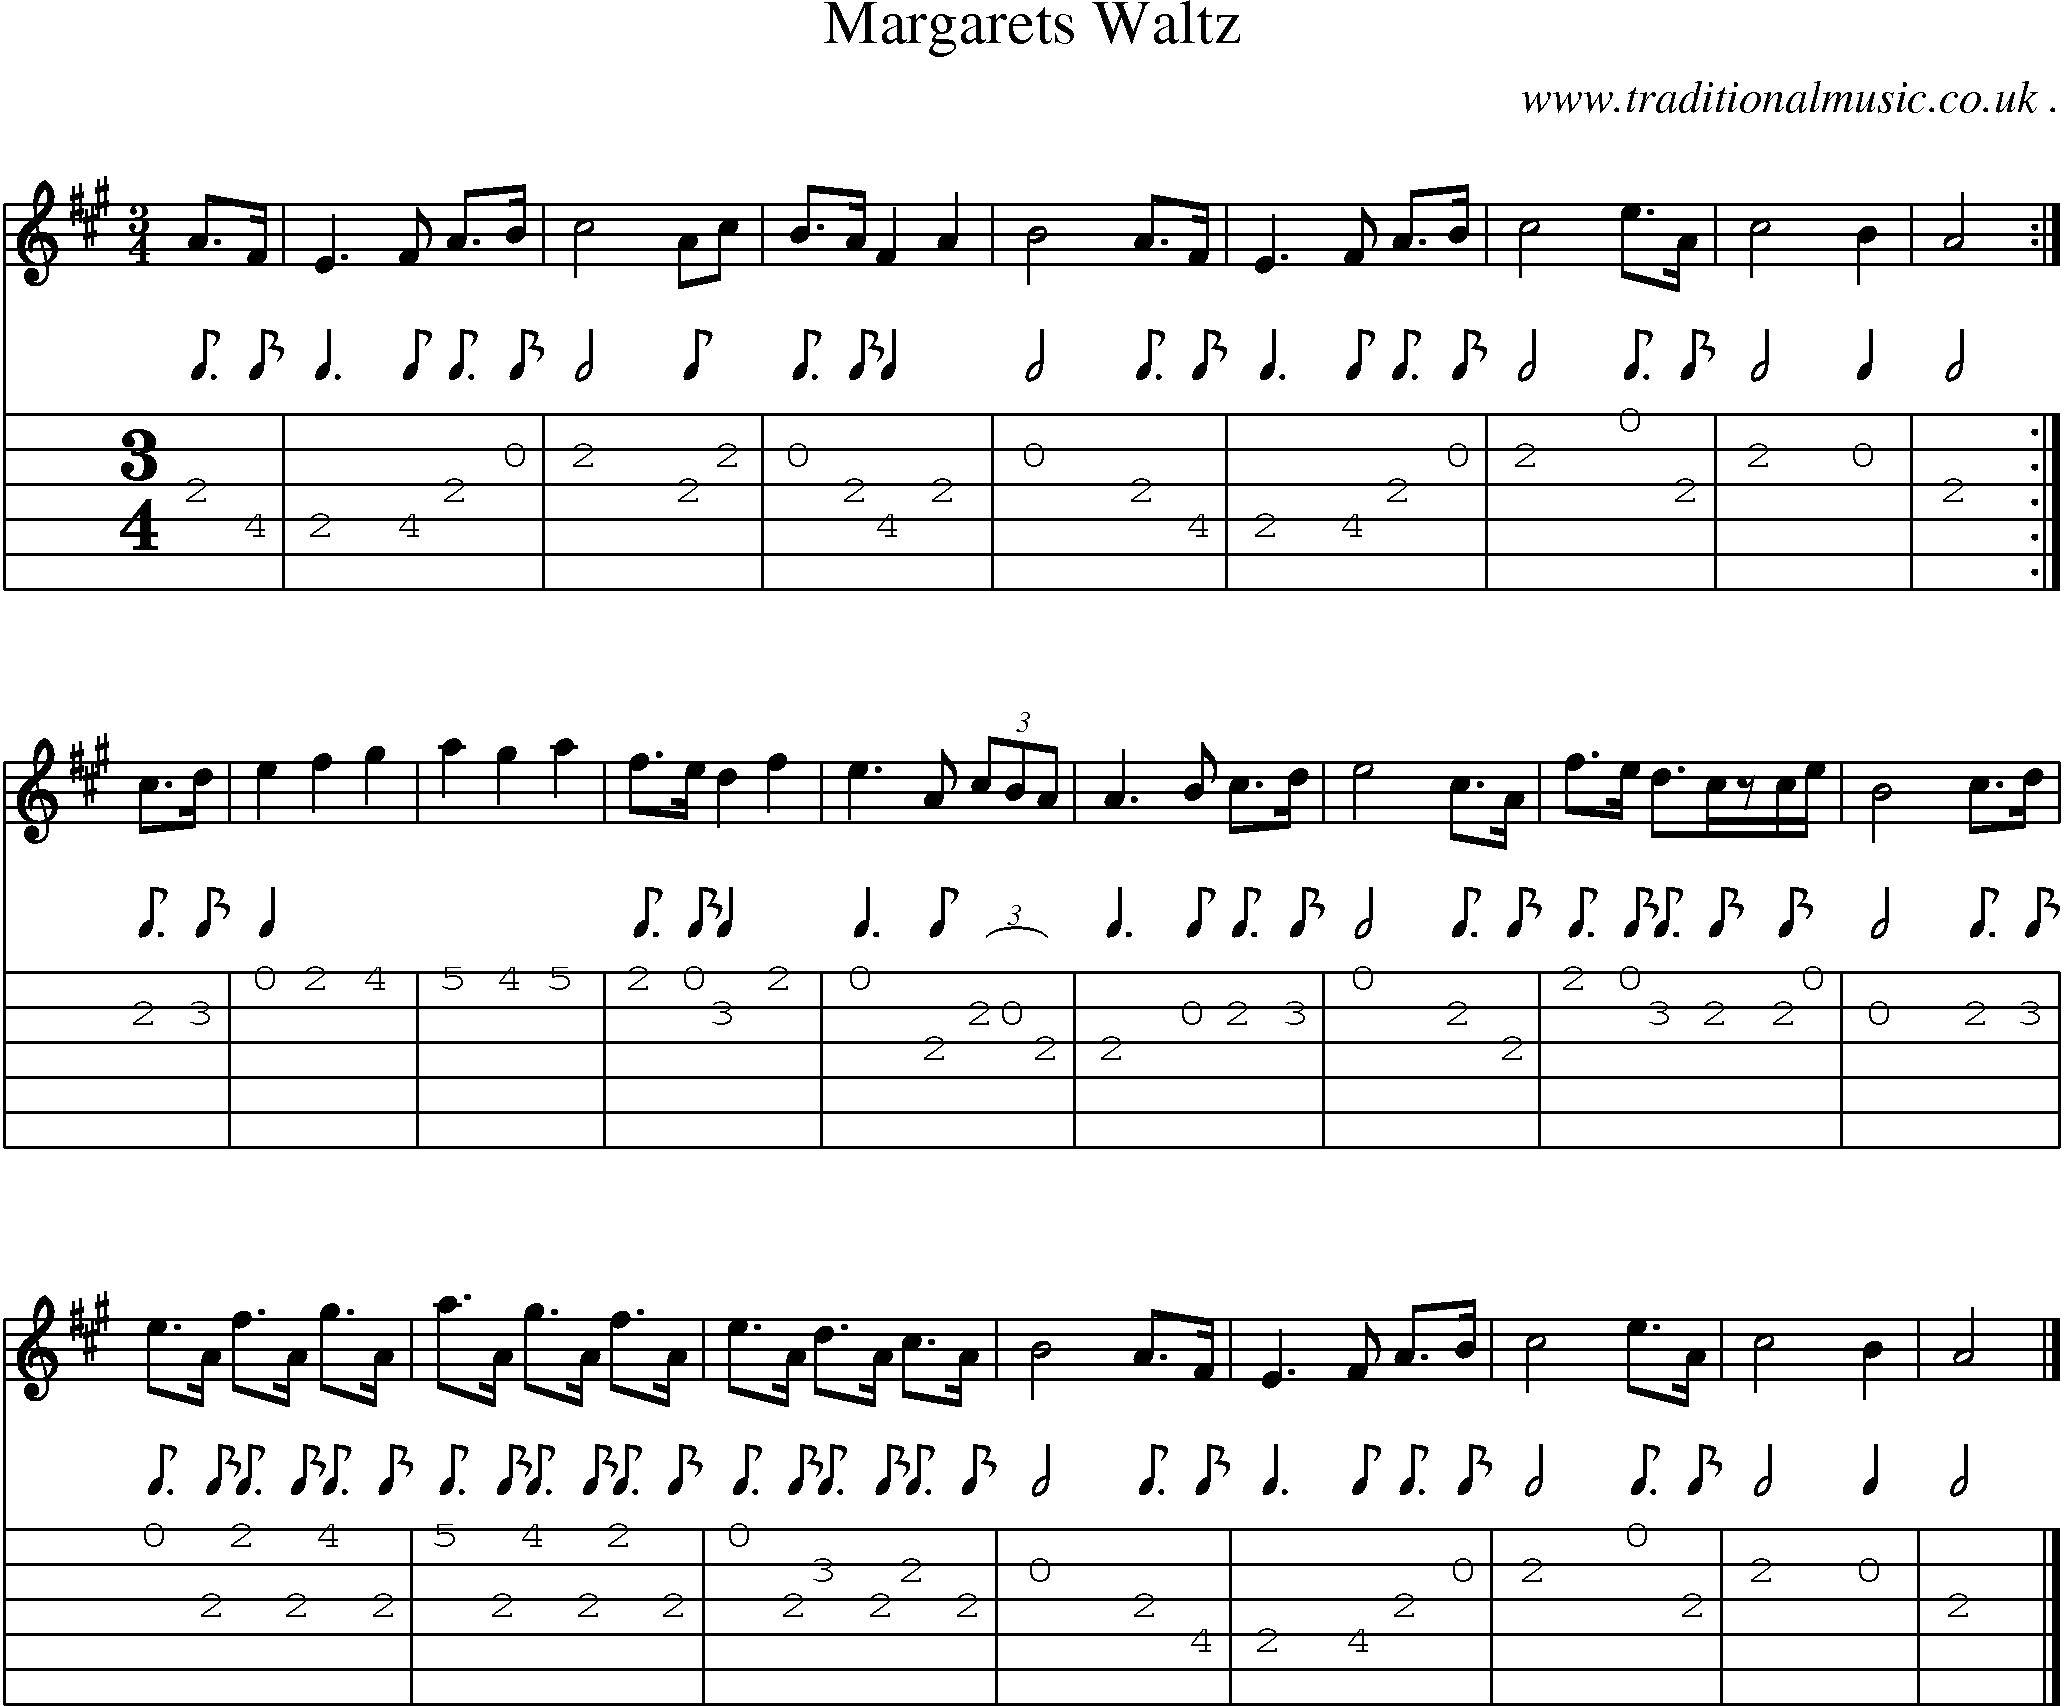 Sheet-music  score, Chords and Guitar Tabs for Margarets Waltz